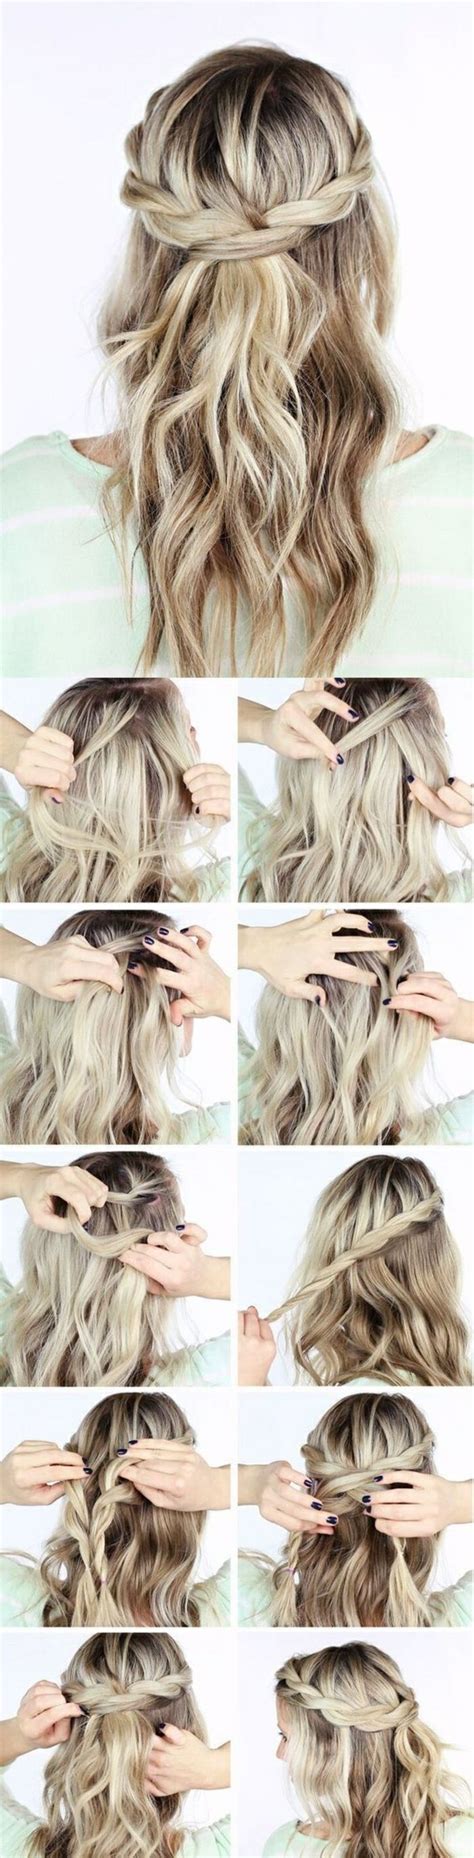 Here she shares her best advice on how to braid hair—along with braid tutorials for short hair, fine hair, curly hair, and more. 1001+ Ideas and instructions on how to make braided hairstyles yourself - Short Hairstyles: Best ...